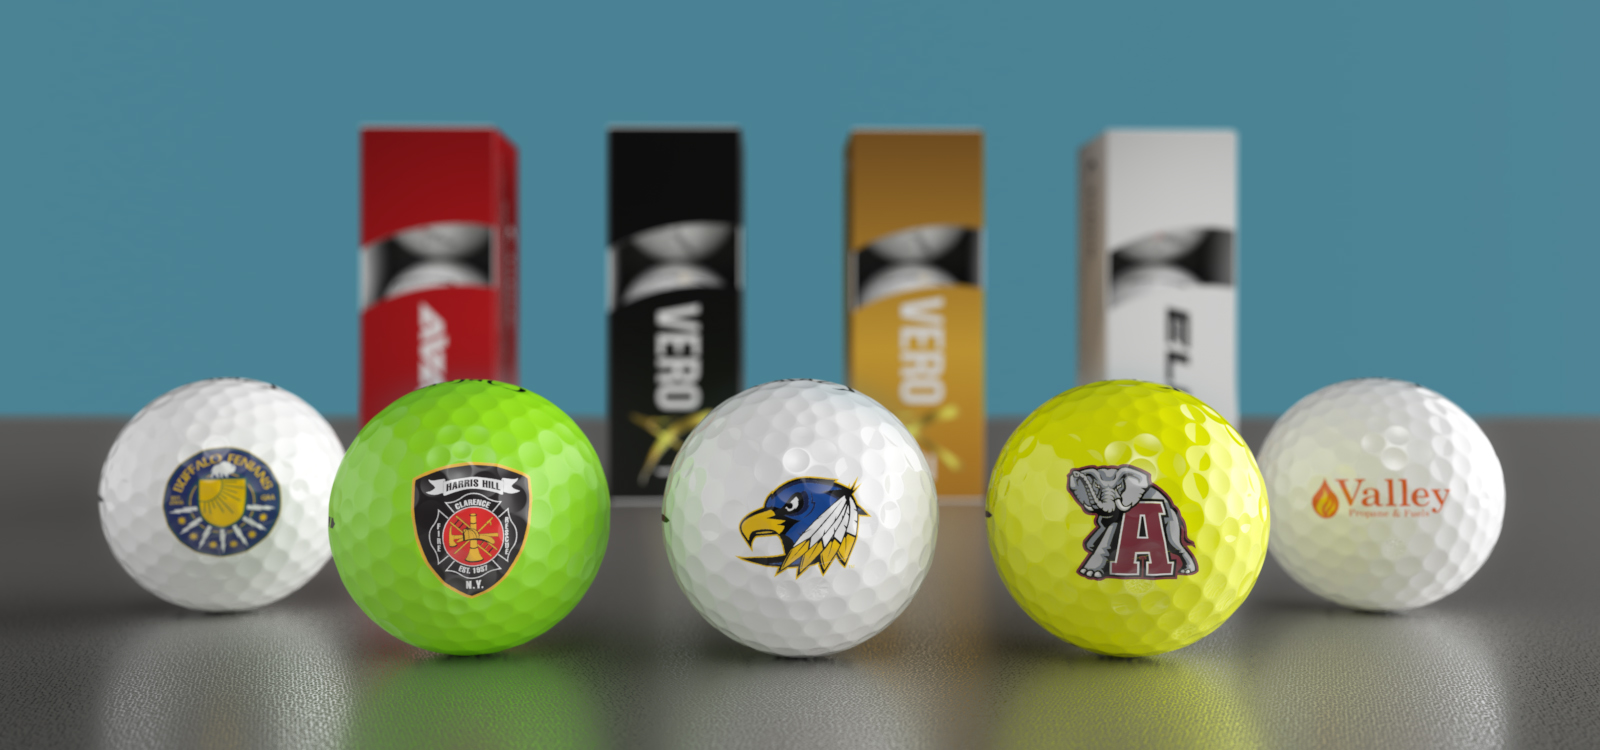 Customize Golf Balls Online | OnCore Golf - Add Your Logo, Text or Images